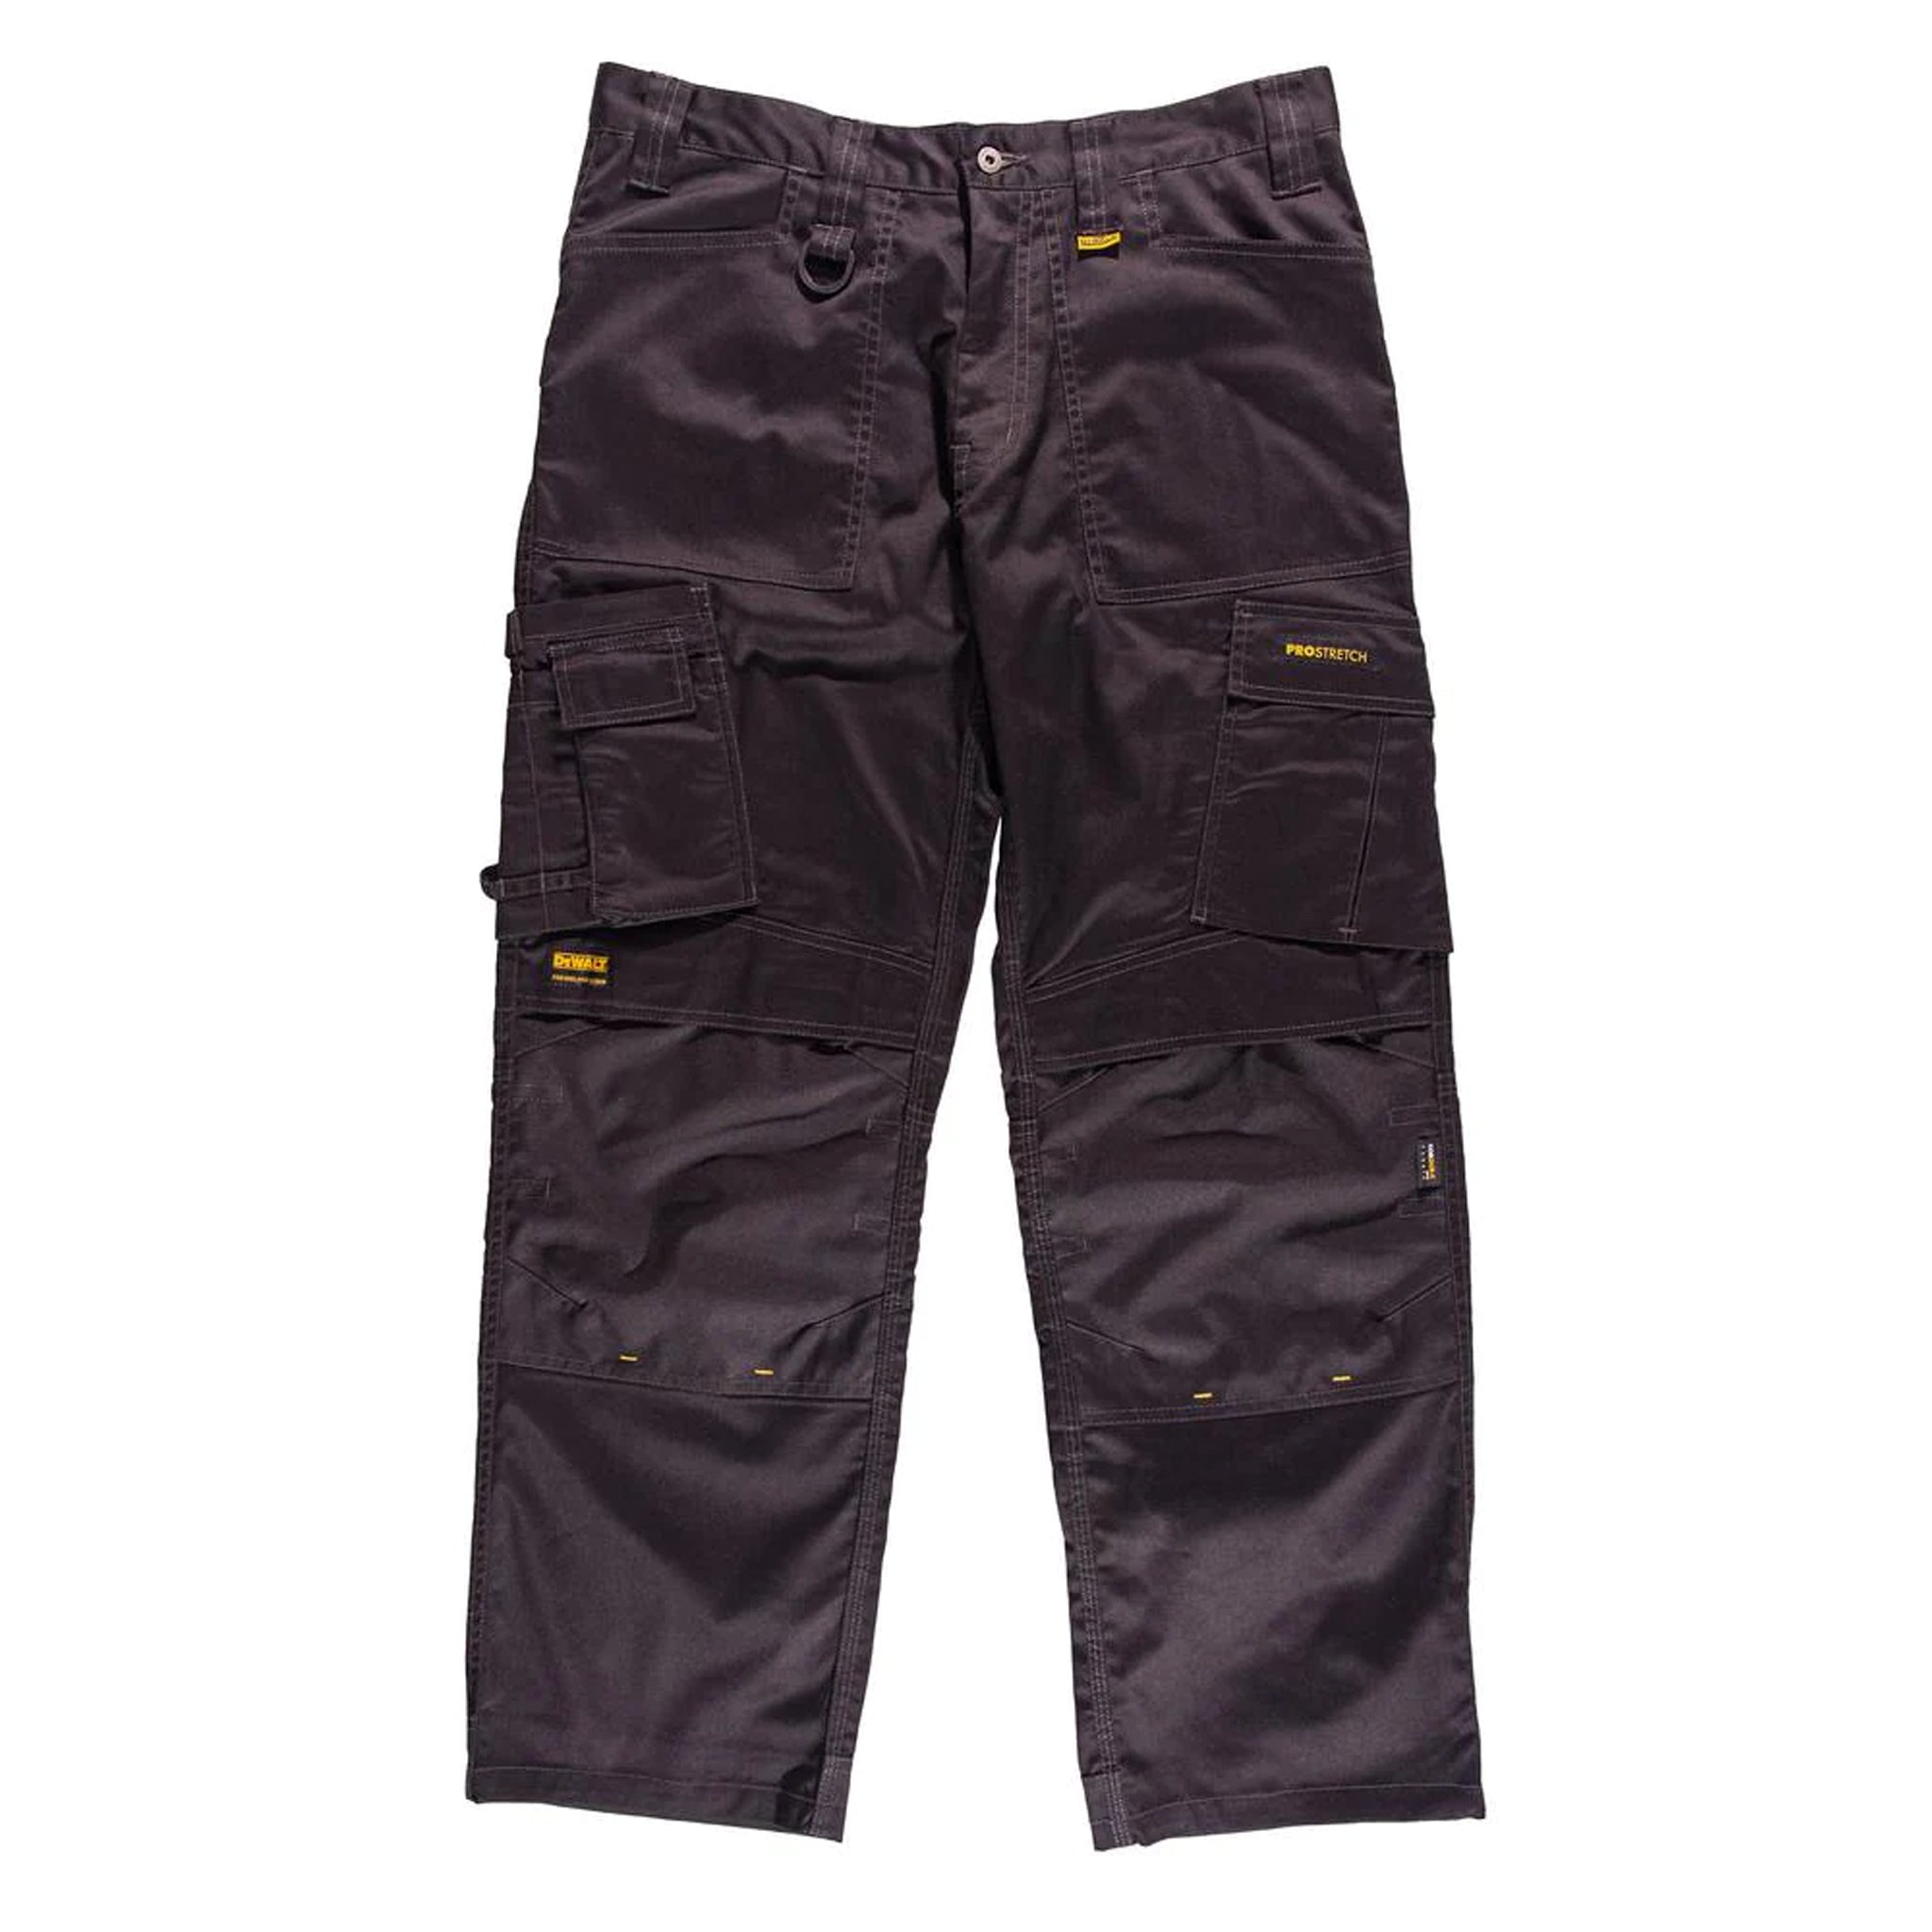 DEWALT Men's DXWW50022 Stretch Work Pants – That Shoe Store and More